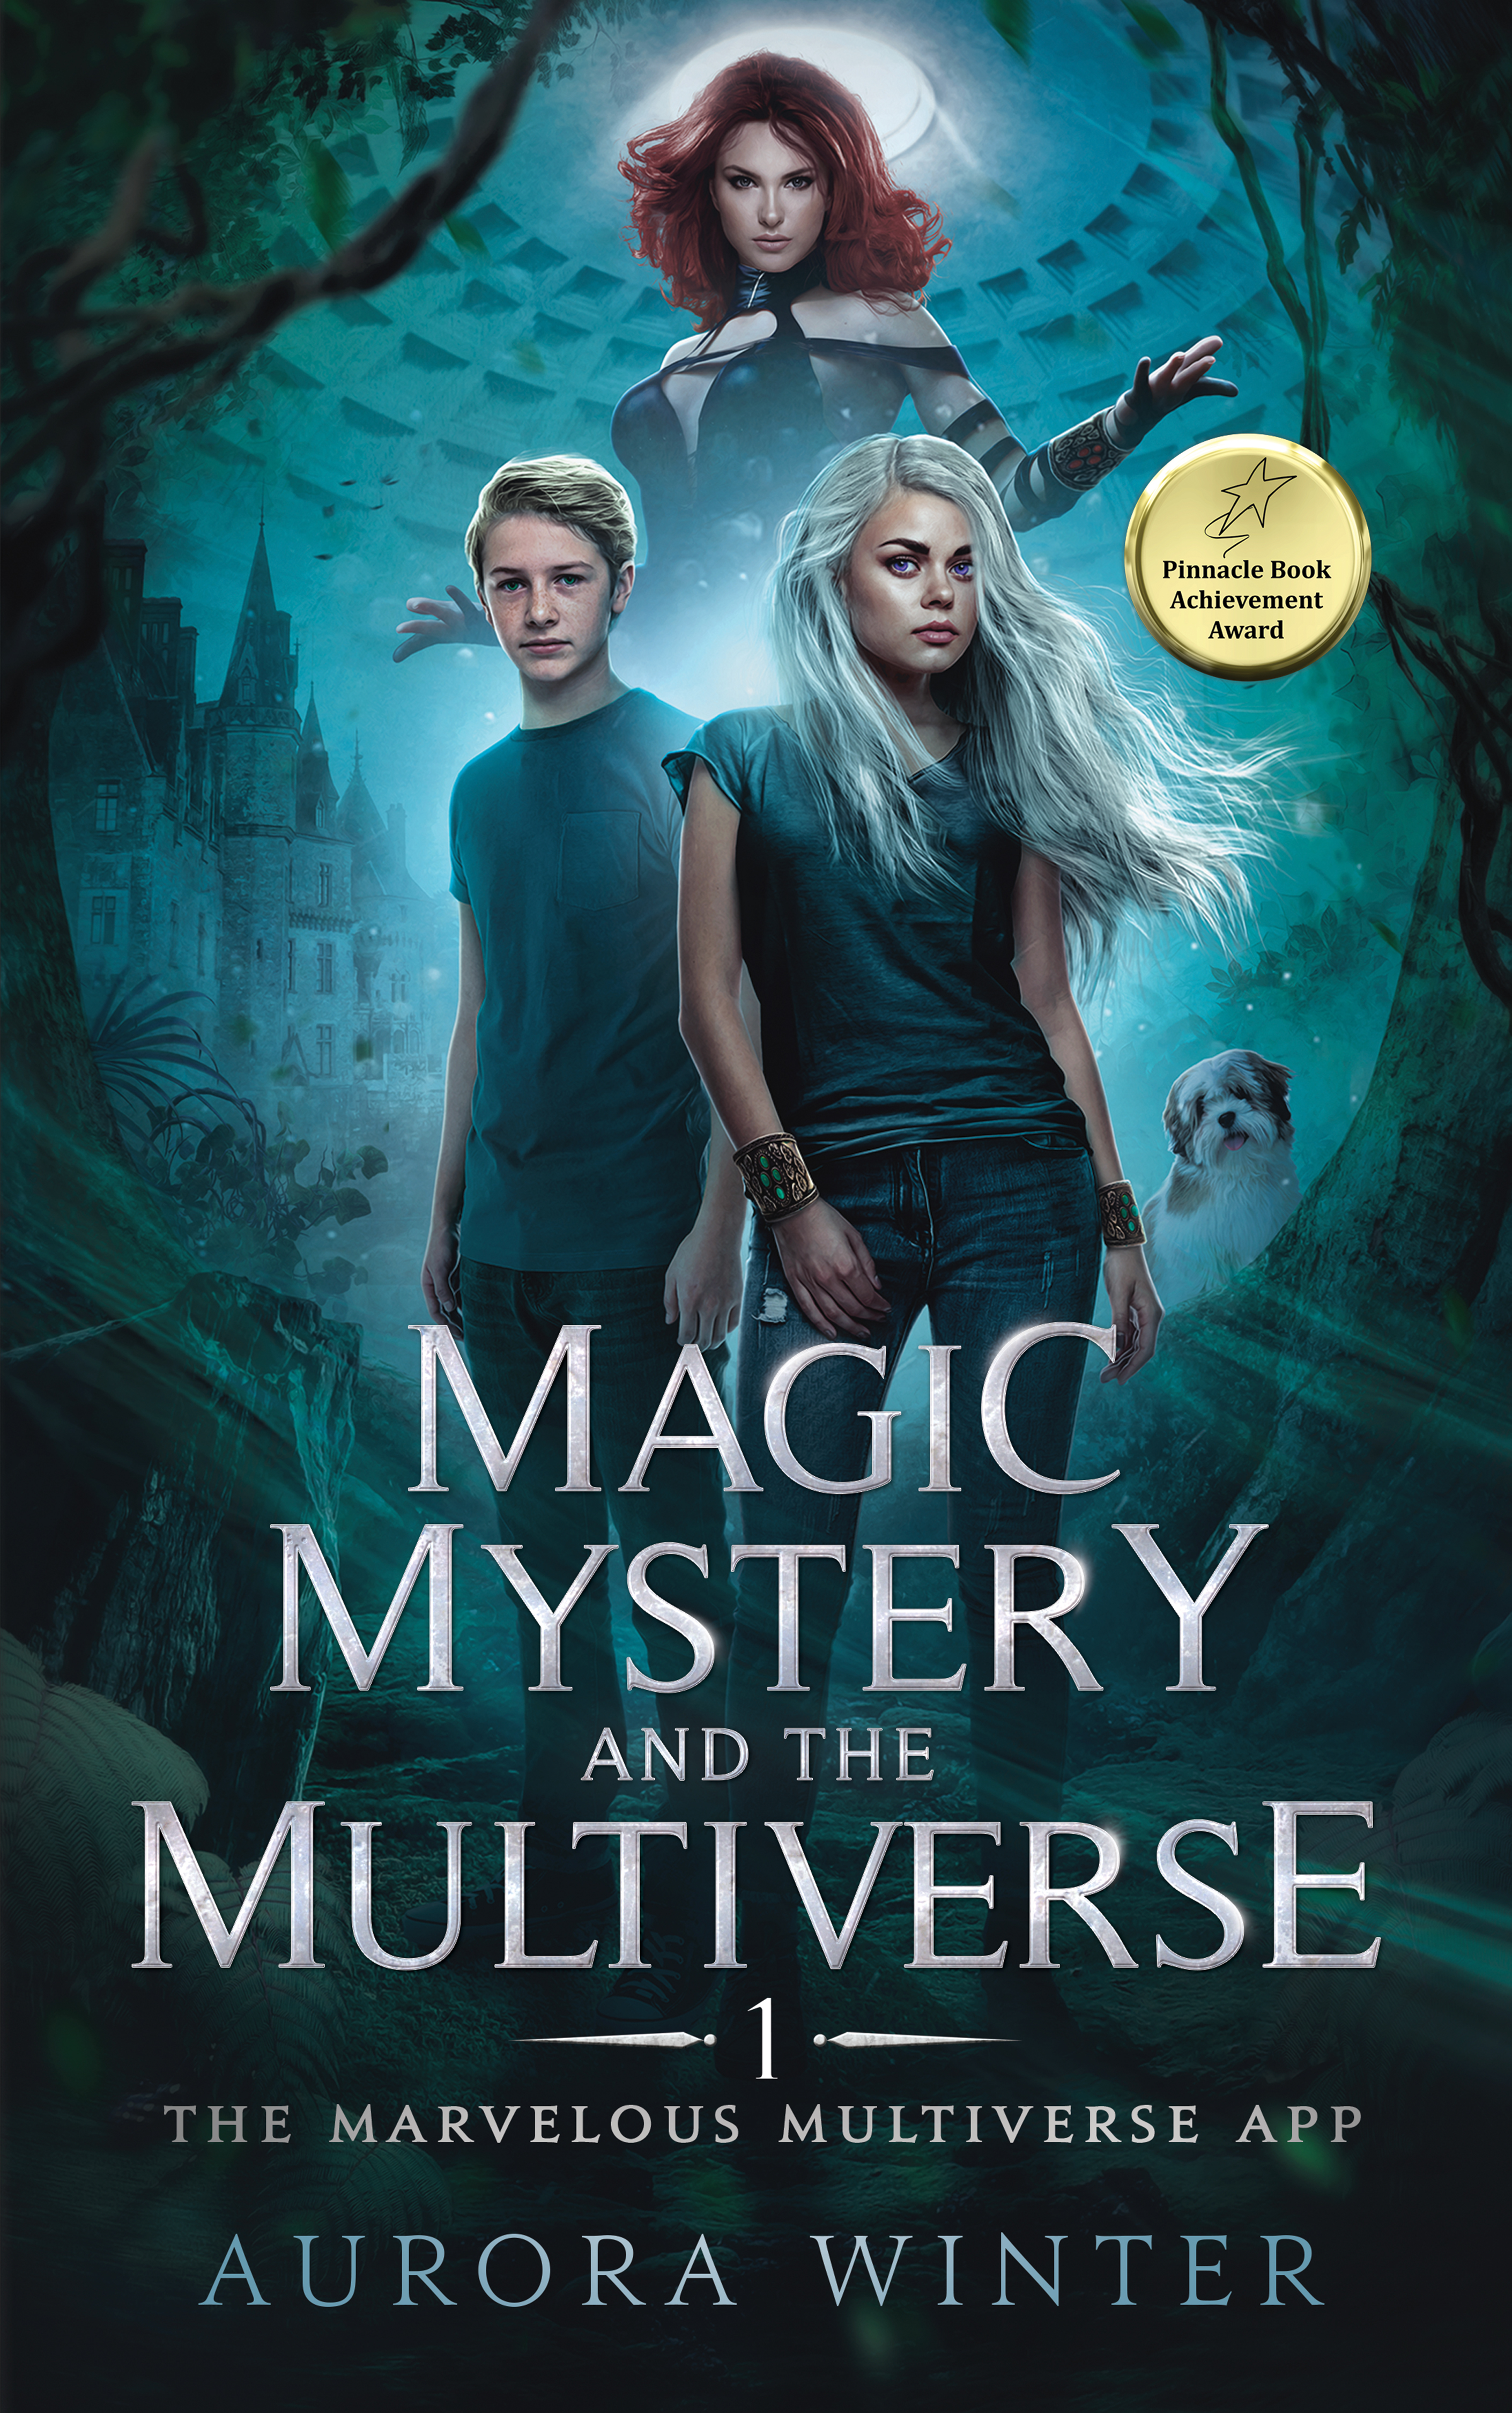 Magic, Mystery, and the Multiverse by Aurora Winter. Book Cover